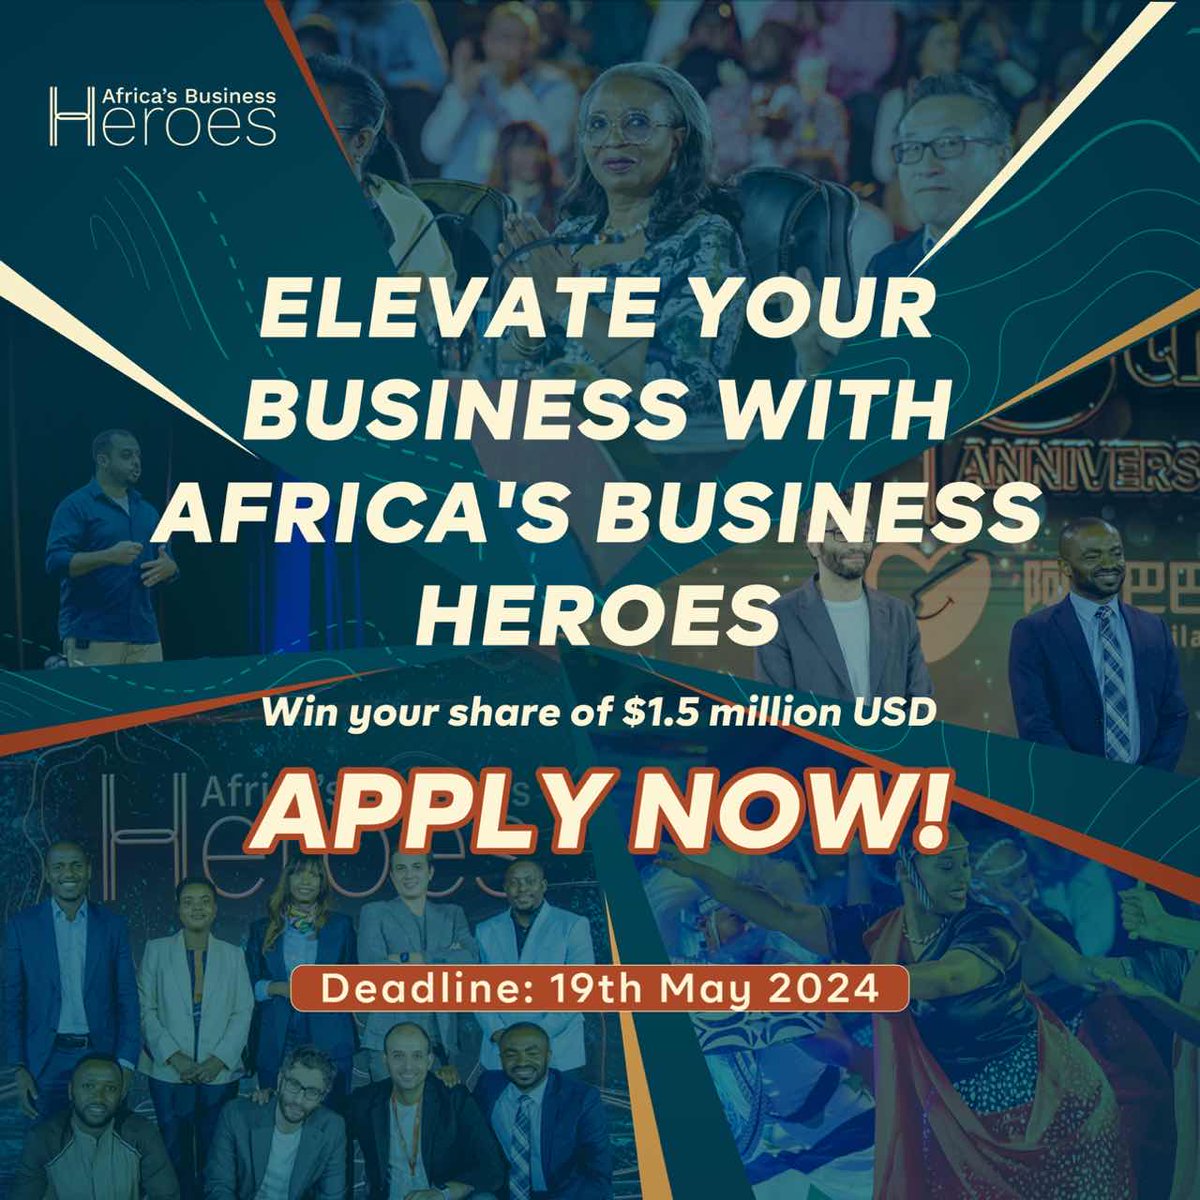 This opportunity is yours! You can be the next Africa’s Business Hero. 👉 Is your business registered and operational in Africa? 👉 Are you an African entrepreneur creating a positive impact? 👉 Does your business have a 3-year track record? If so, this is YOUR time! Apply to…